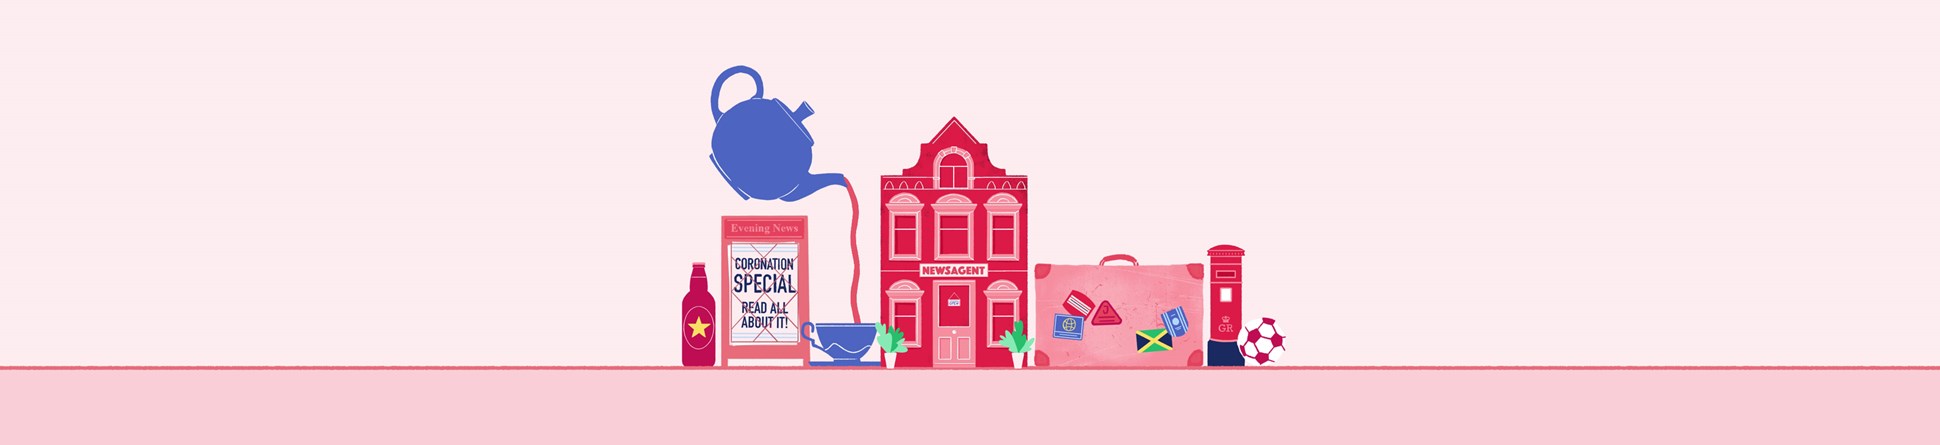 Illustration of a drinks bottle, a billboard, a cup of tea, a building, a suitcase, a postbox, a football